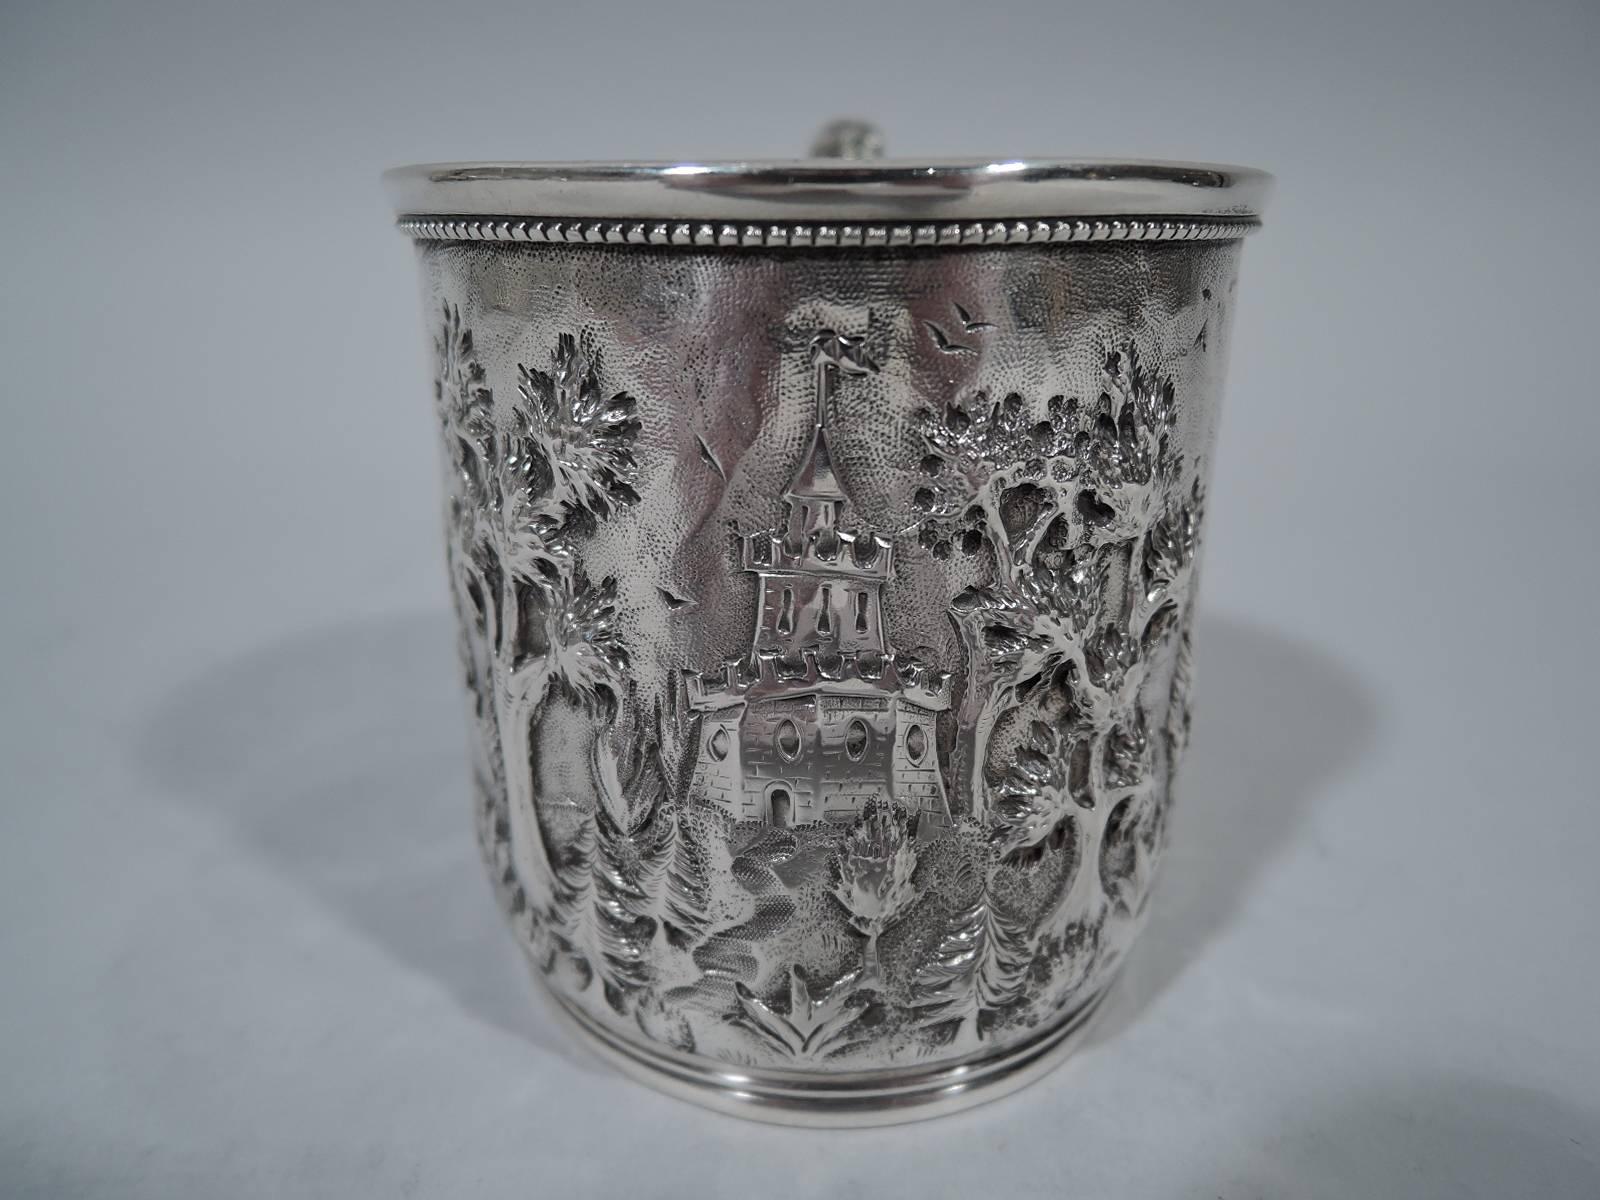 Sterling silver baby cup. Made by AG Schultz & Co. in Baltimore, circa 1900. Straight sides with foot ring, beaded rim, and worked scroll handle. Fanciful landscape with turreted bridge, castellated tower, and windmill. Sweet pastoral nostalgia.